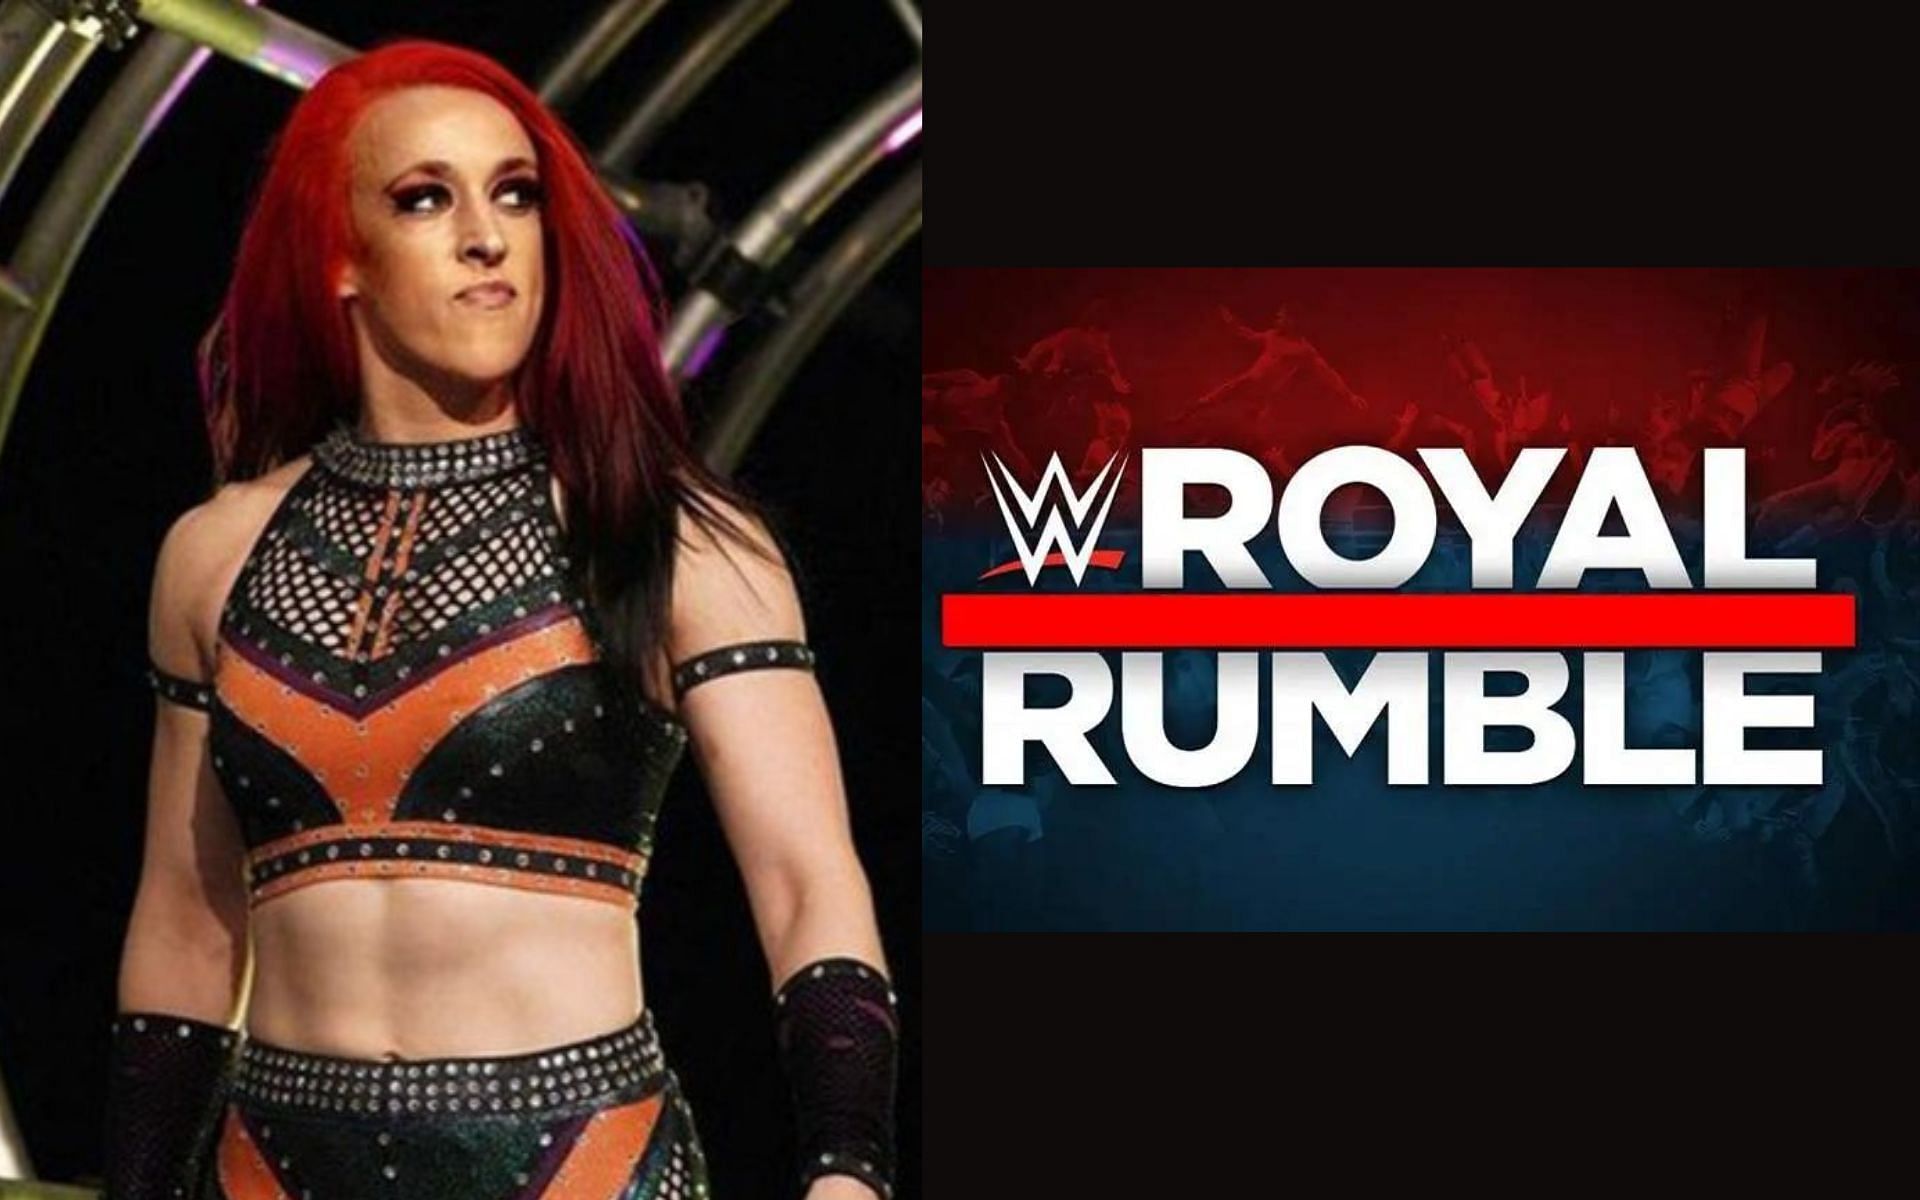 The winner of the Royal Rumble match earns an opportunity to go up against any WWE Champion